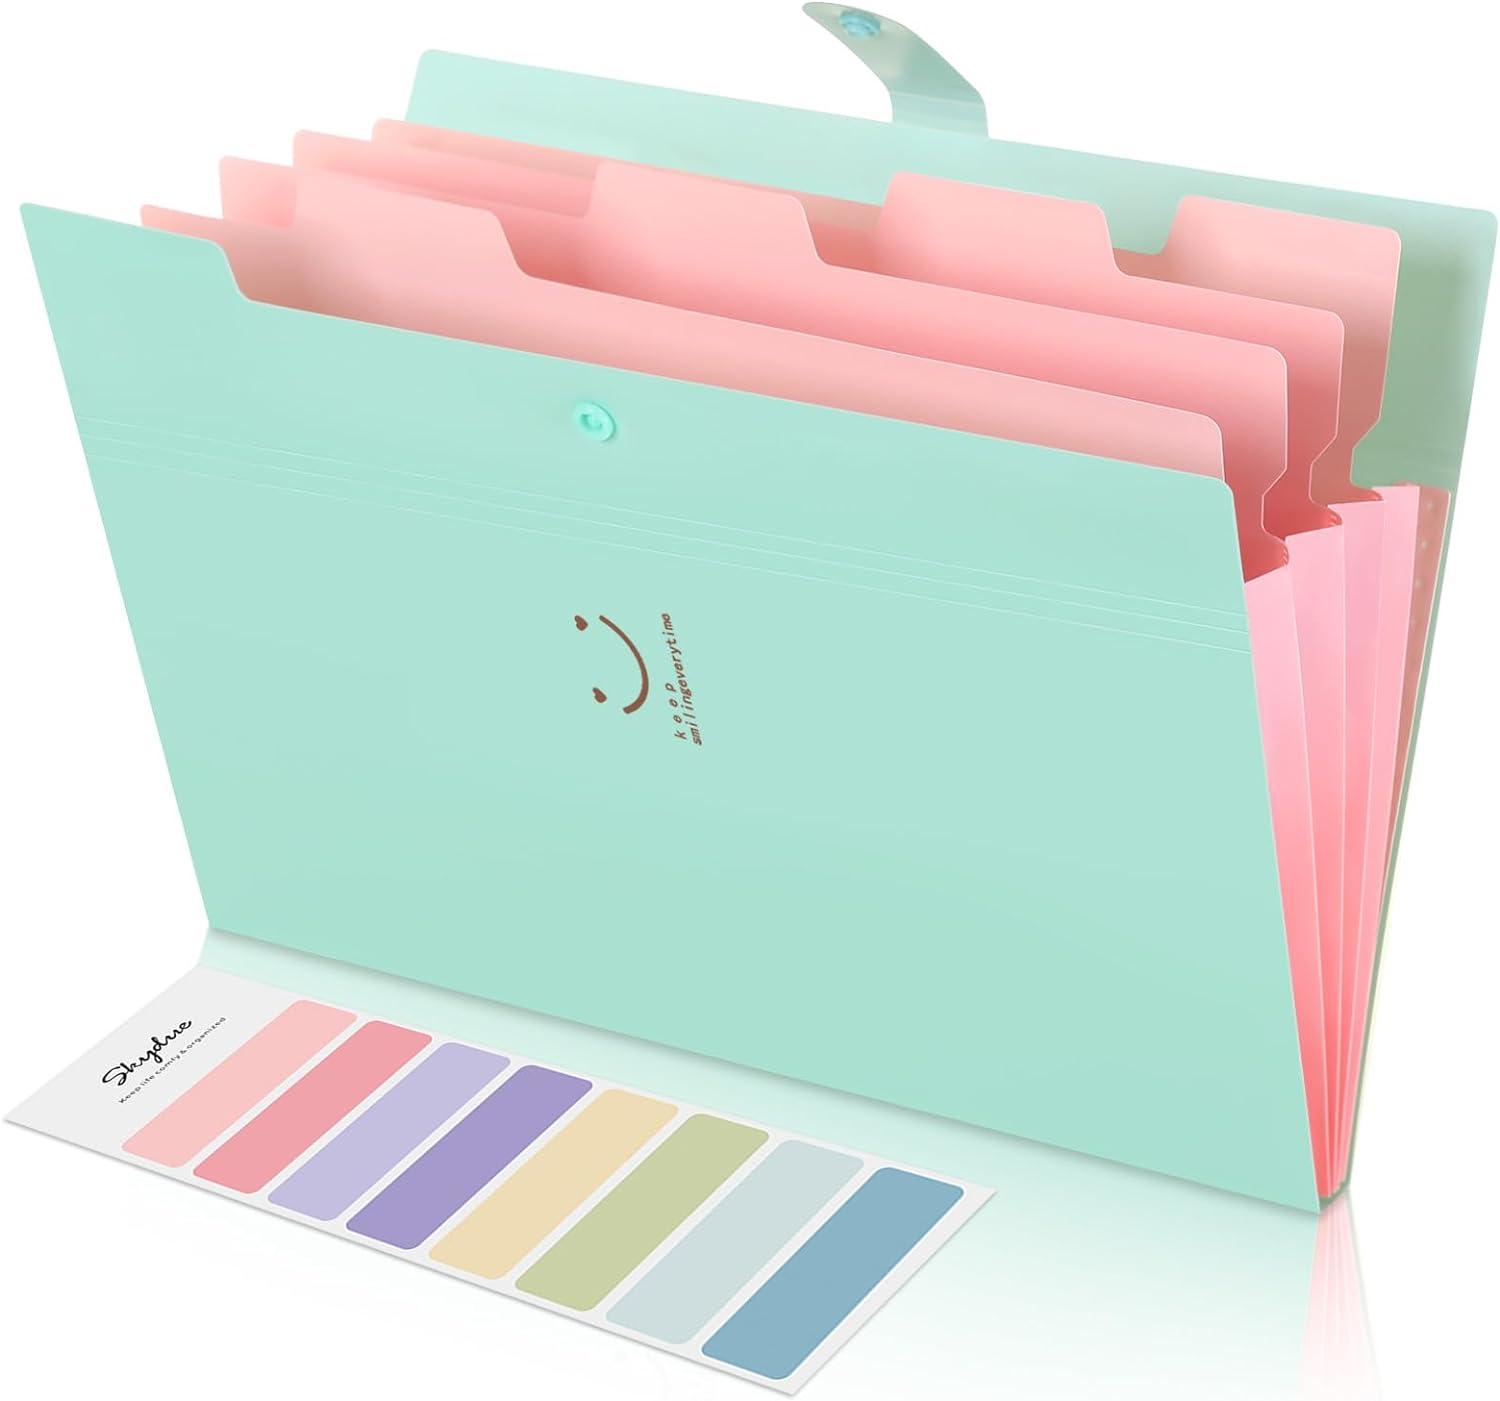 skydue letter a4 paper expanding file folder pockets accordion document organizer jade  skydue b01n3m1we1